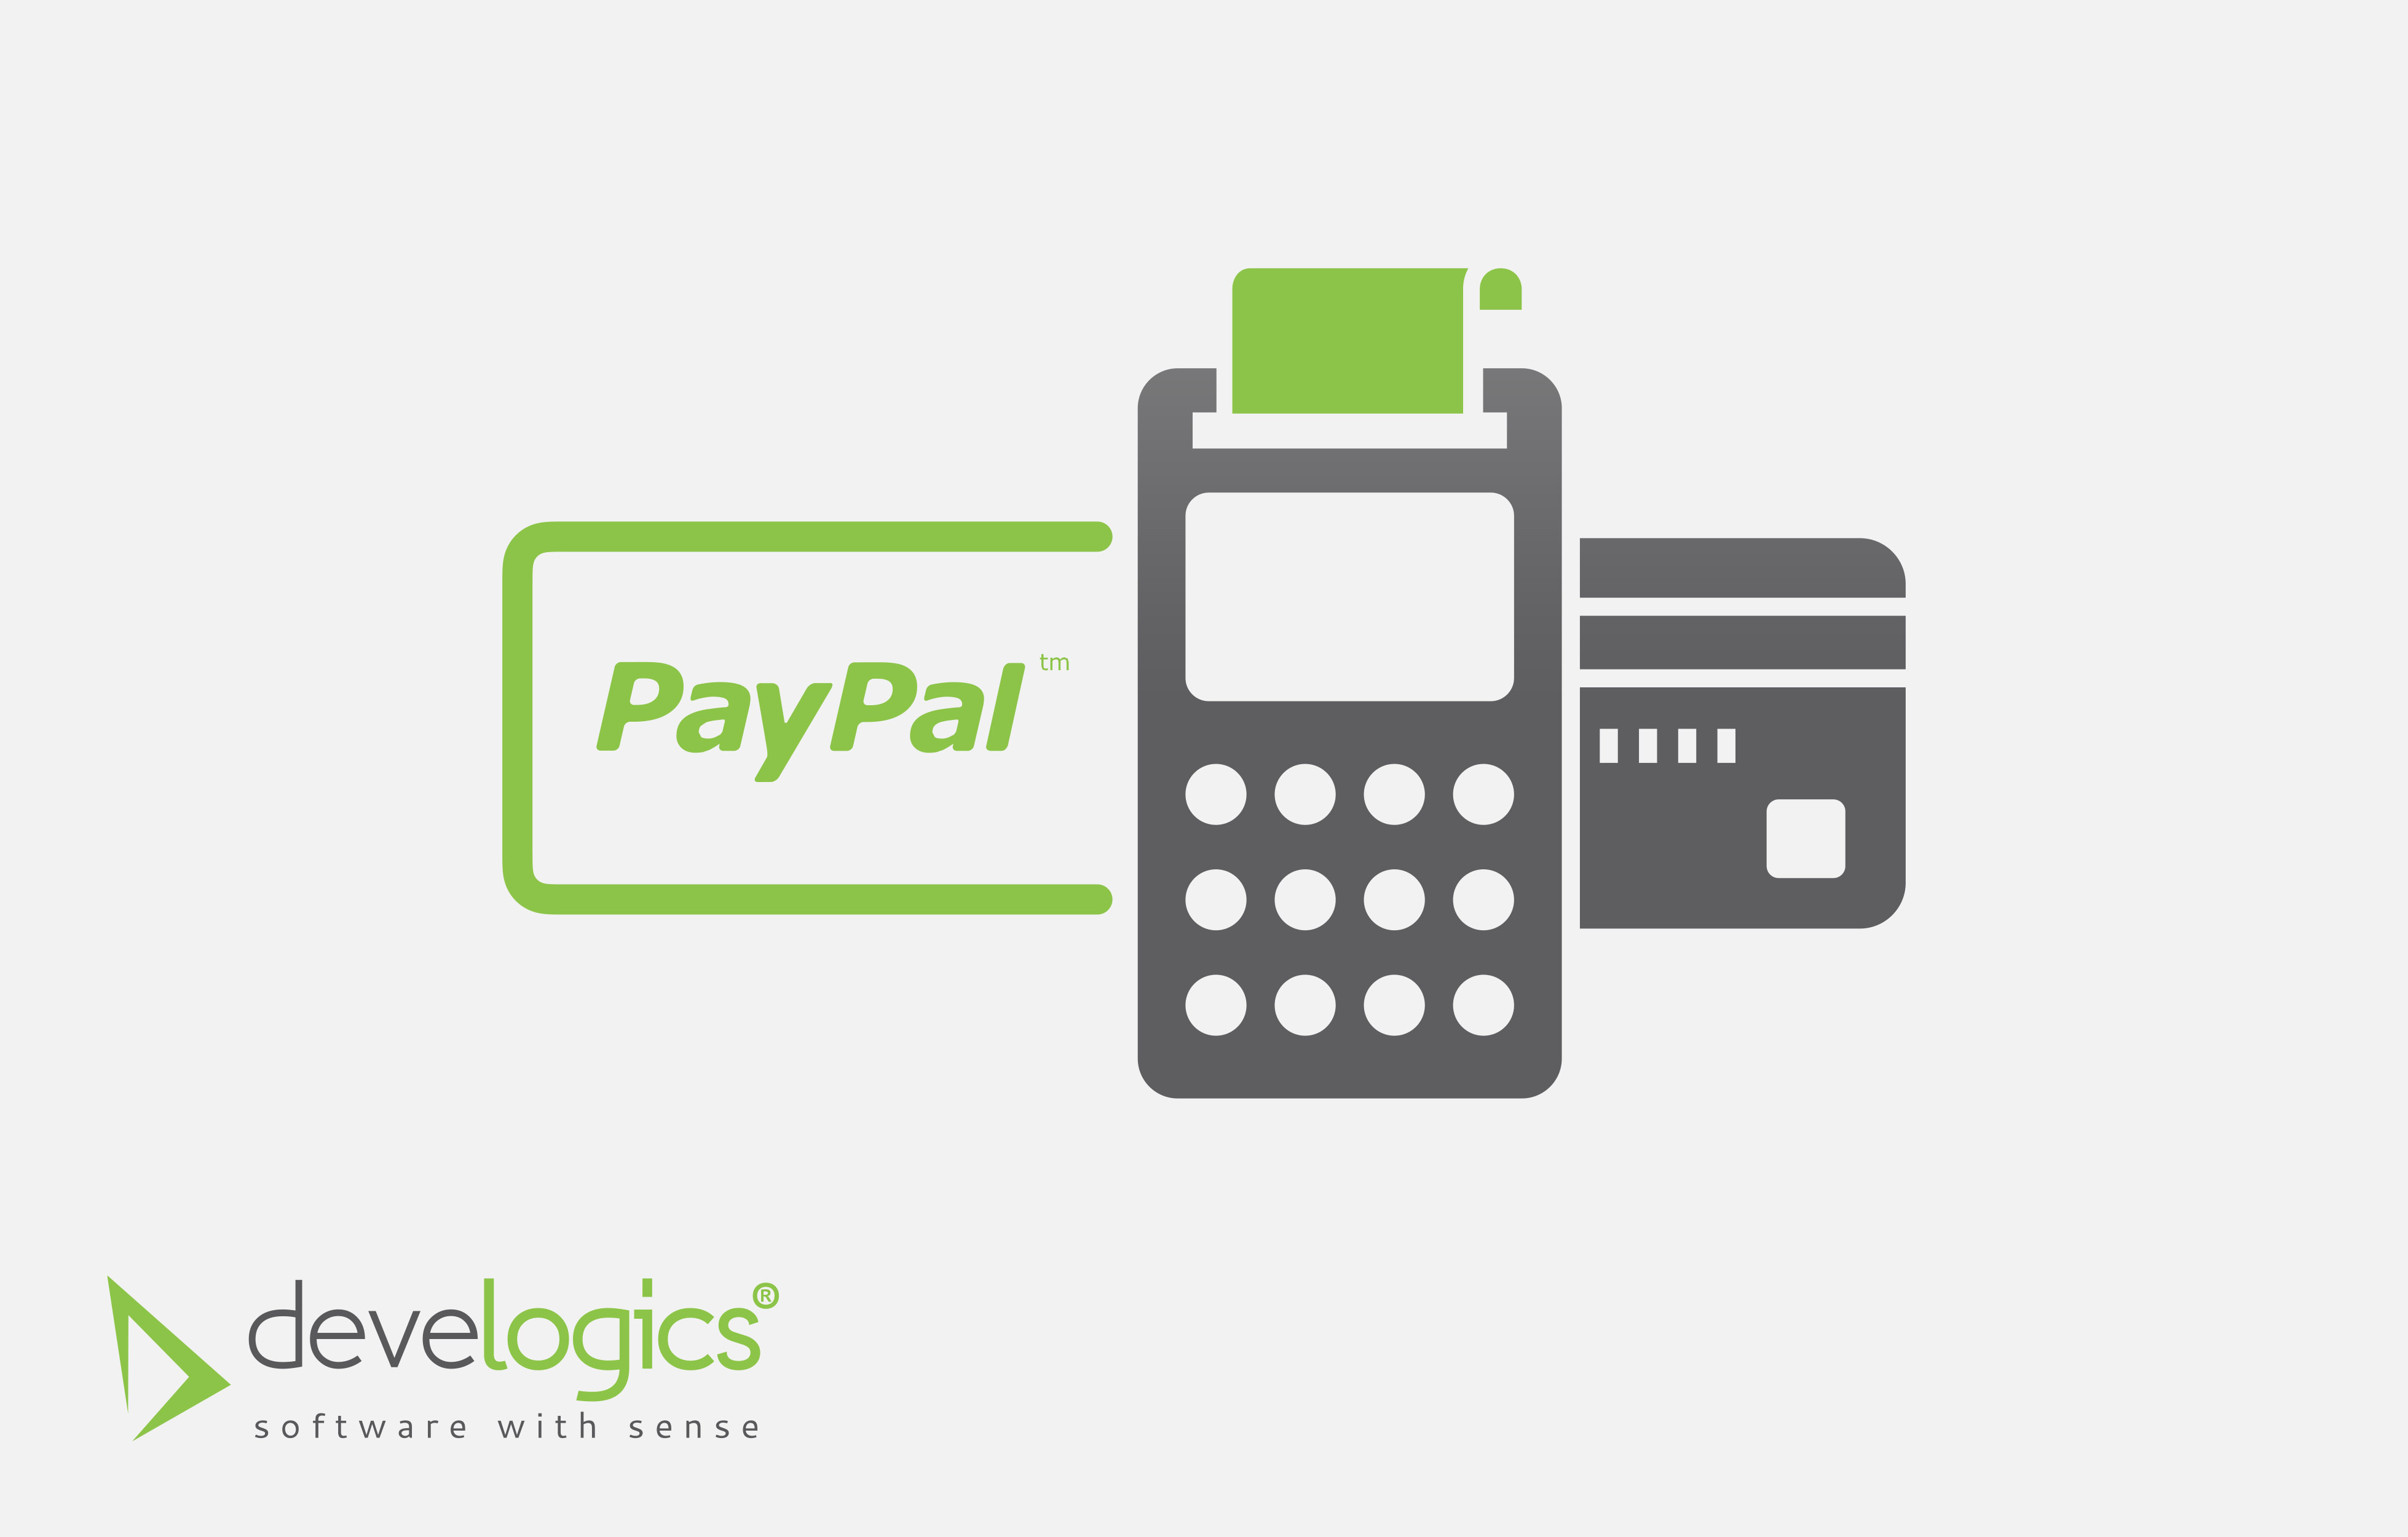 PayPal integration into an existing POS solution